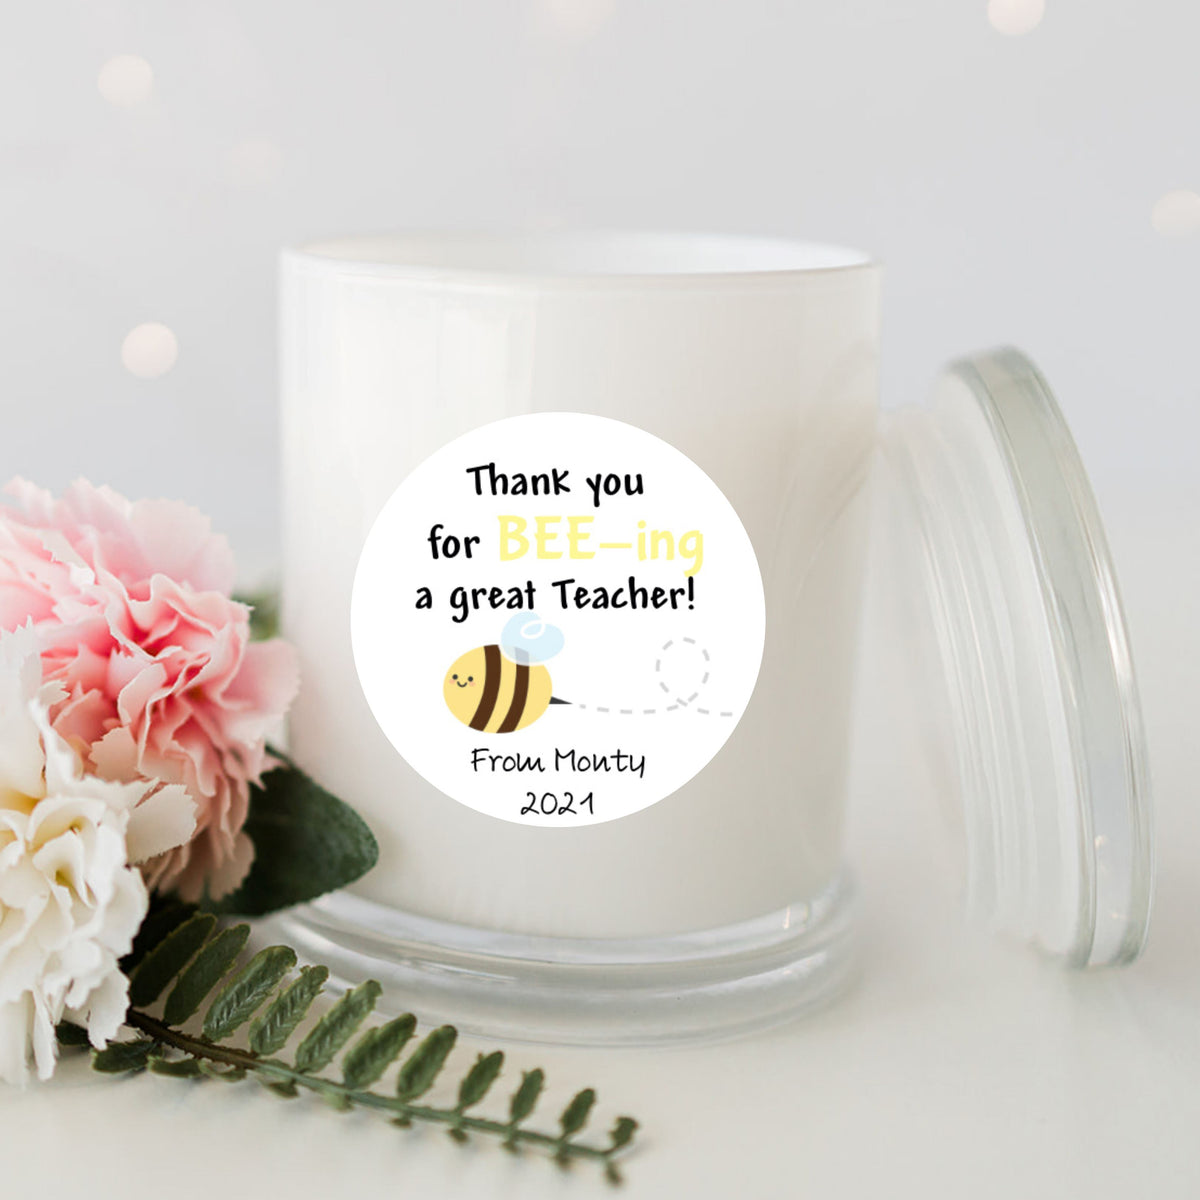 Thank you for bee-ing a great Teacher Personalised Candle Large White Glassware Candle RISE The Candle Studio 